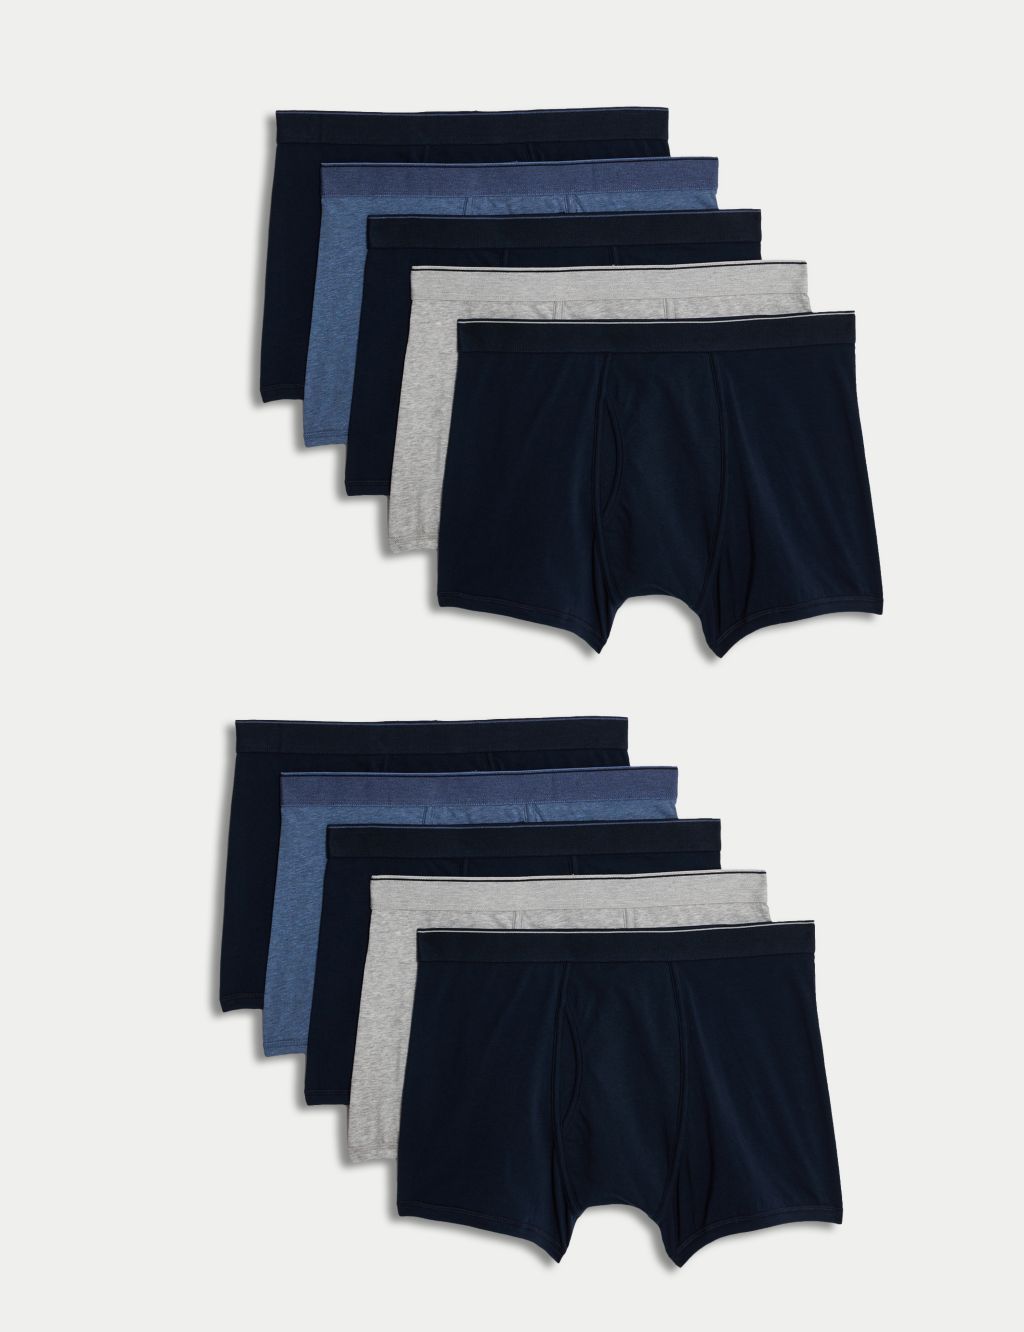 Vanever 3PK Men's Woven Boxers, 100% Cotton Boxer Shorts for Men,  Boxershorts with Button Fly, Underwear, Navy Assorted, XX-Large :  : Fashion